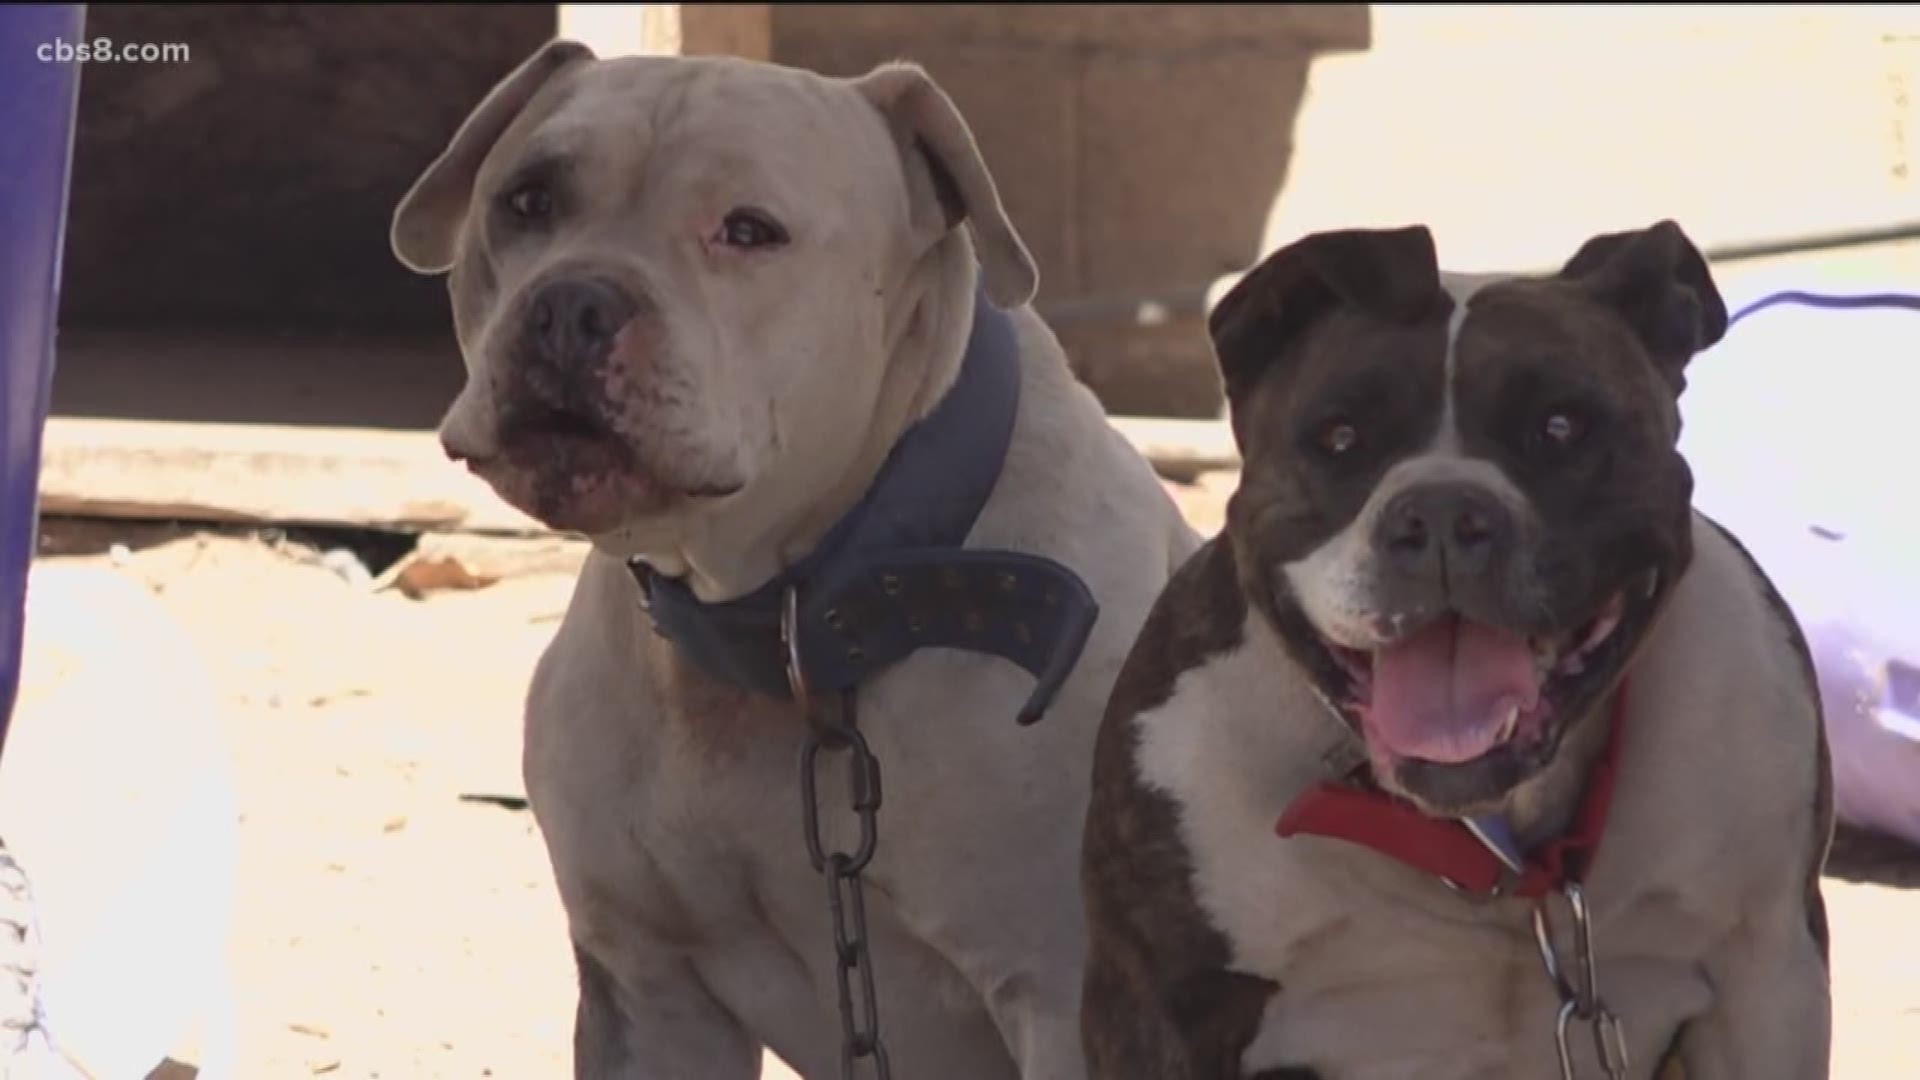 What a difference a day makes. The two pit bulls abandoned and chained out in the sun with no access to food or water are on the road to recovery. On Sunday afternoon, the two dogs were found chained up and tangled in a filthy backyard until a good Samaritan stepped in to help.